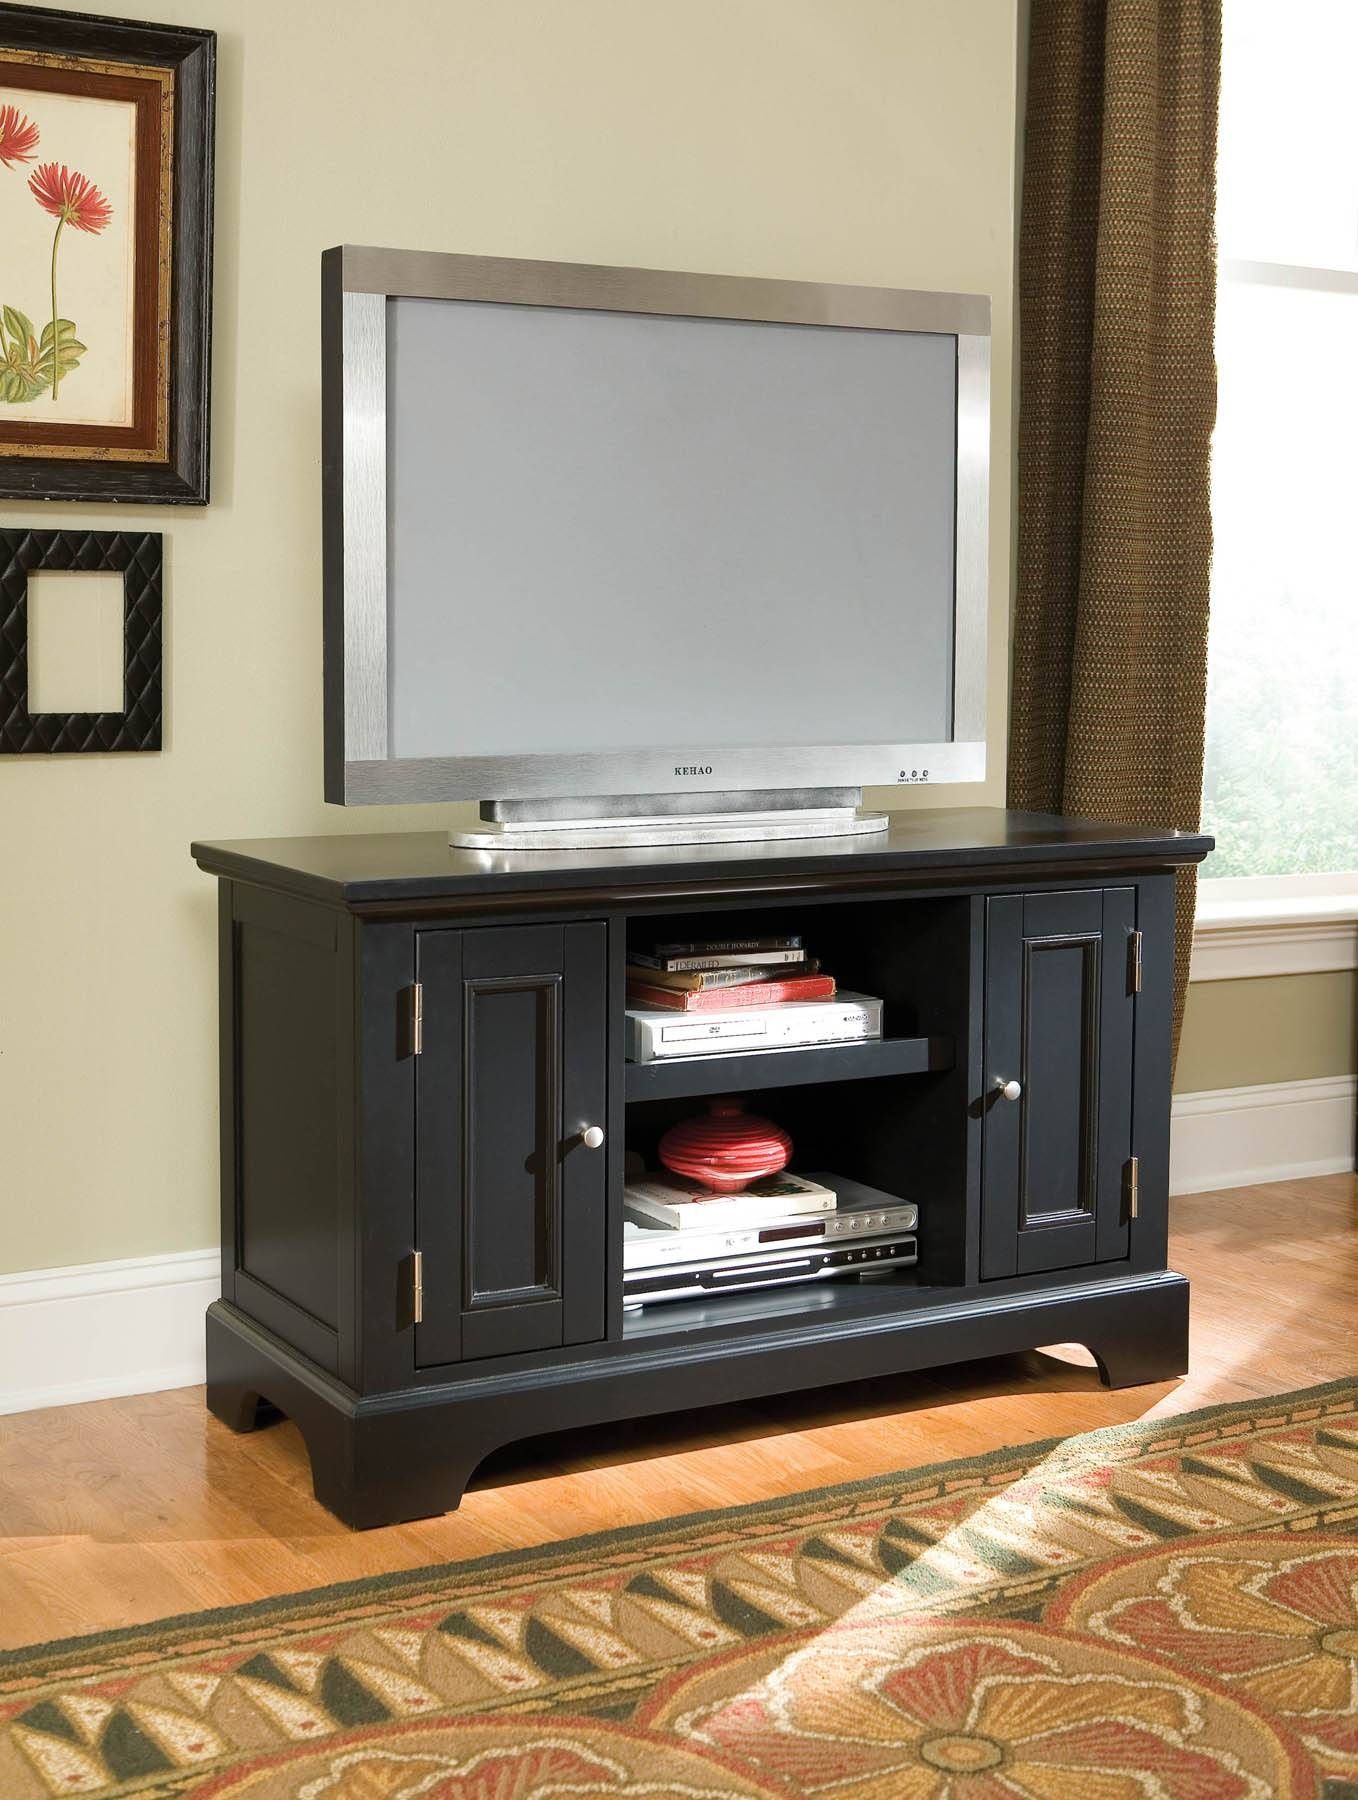 Home Styles Bedford Tv Stand 5531 09 In Bedford Tv Stands (View 1 of 15)